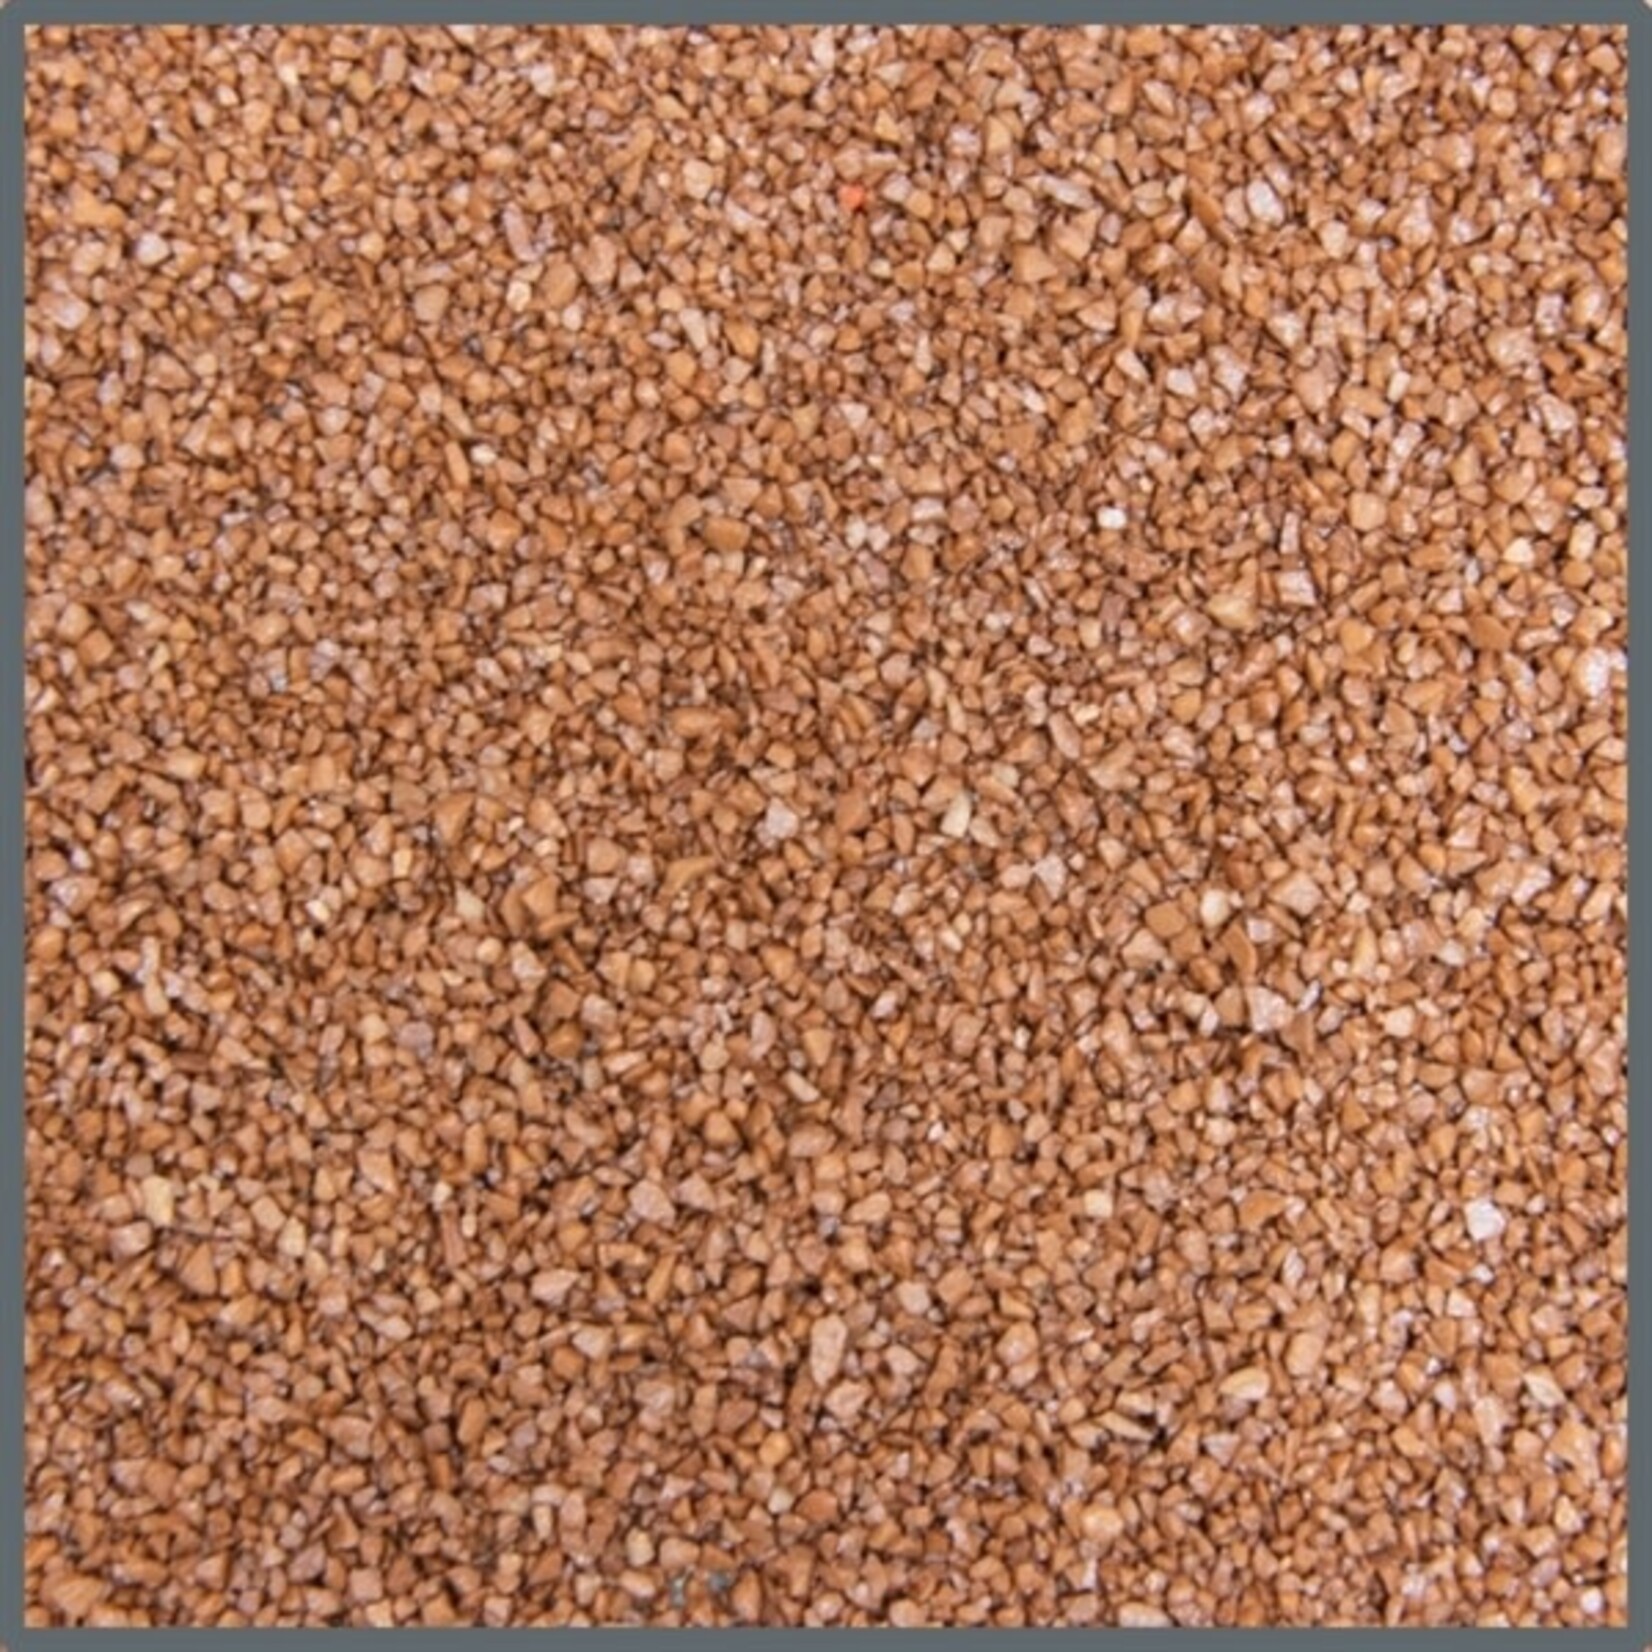 Dupla Ground colour brown earth 0.5-1.4 mm 10 kg